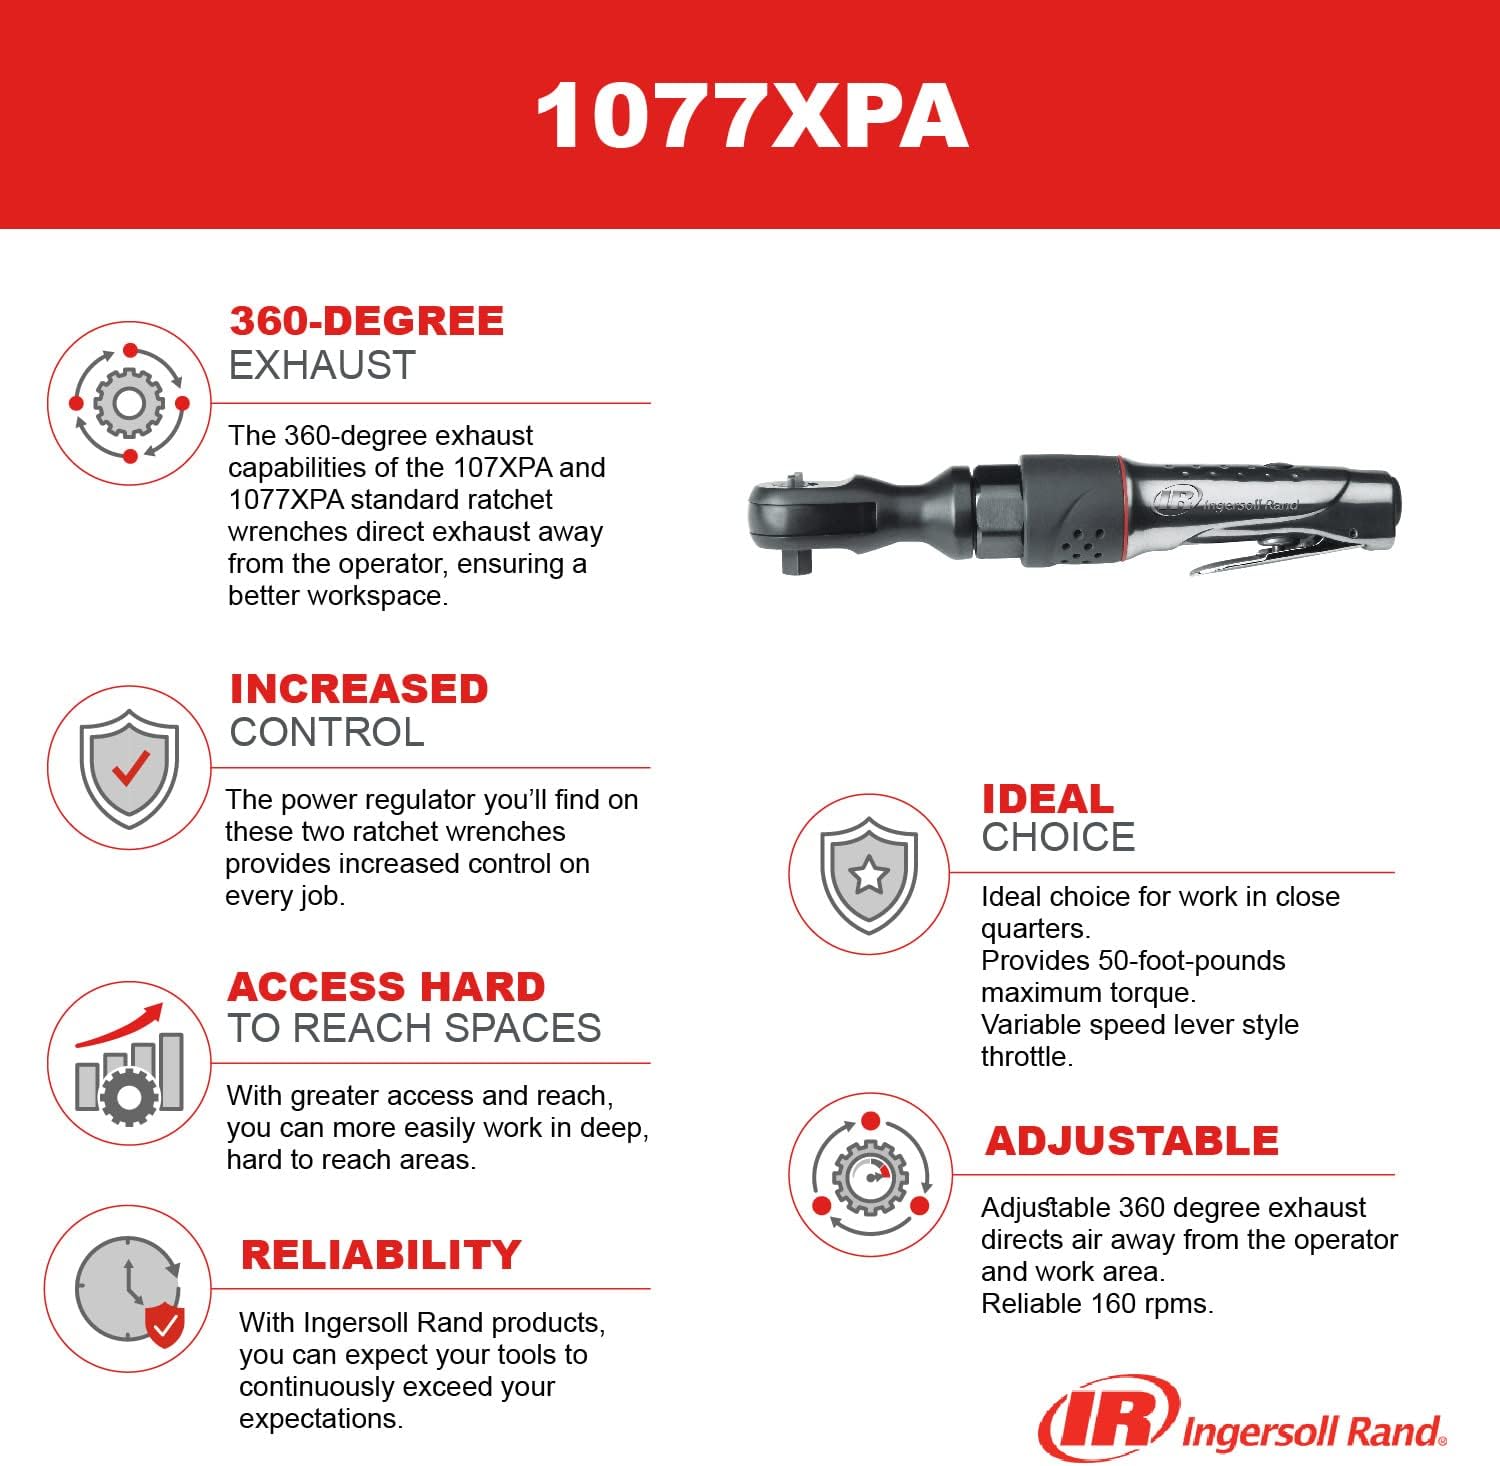 Ingersoll-Rand Ingersoll Rand 1077XPA 1/2" Drive Air Ratchet Wrench, 73 ft-lb Max. Torque, 160 RPM